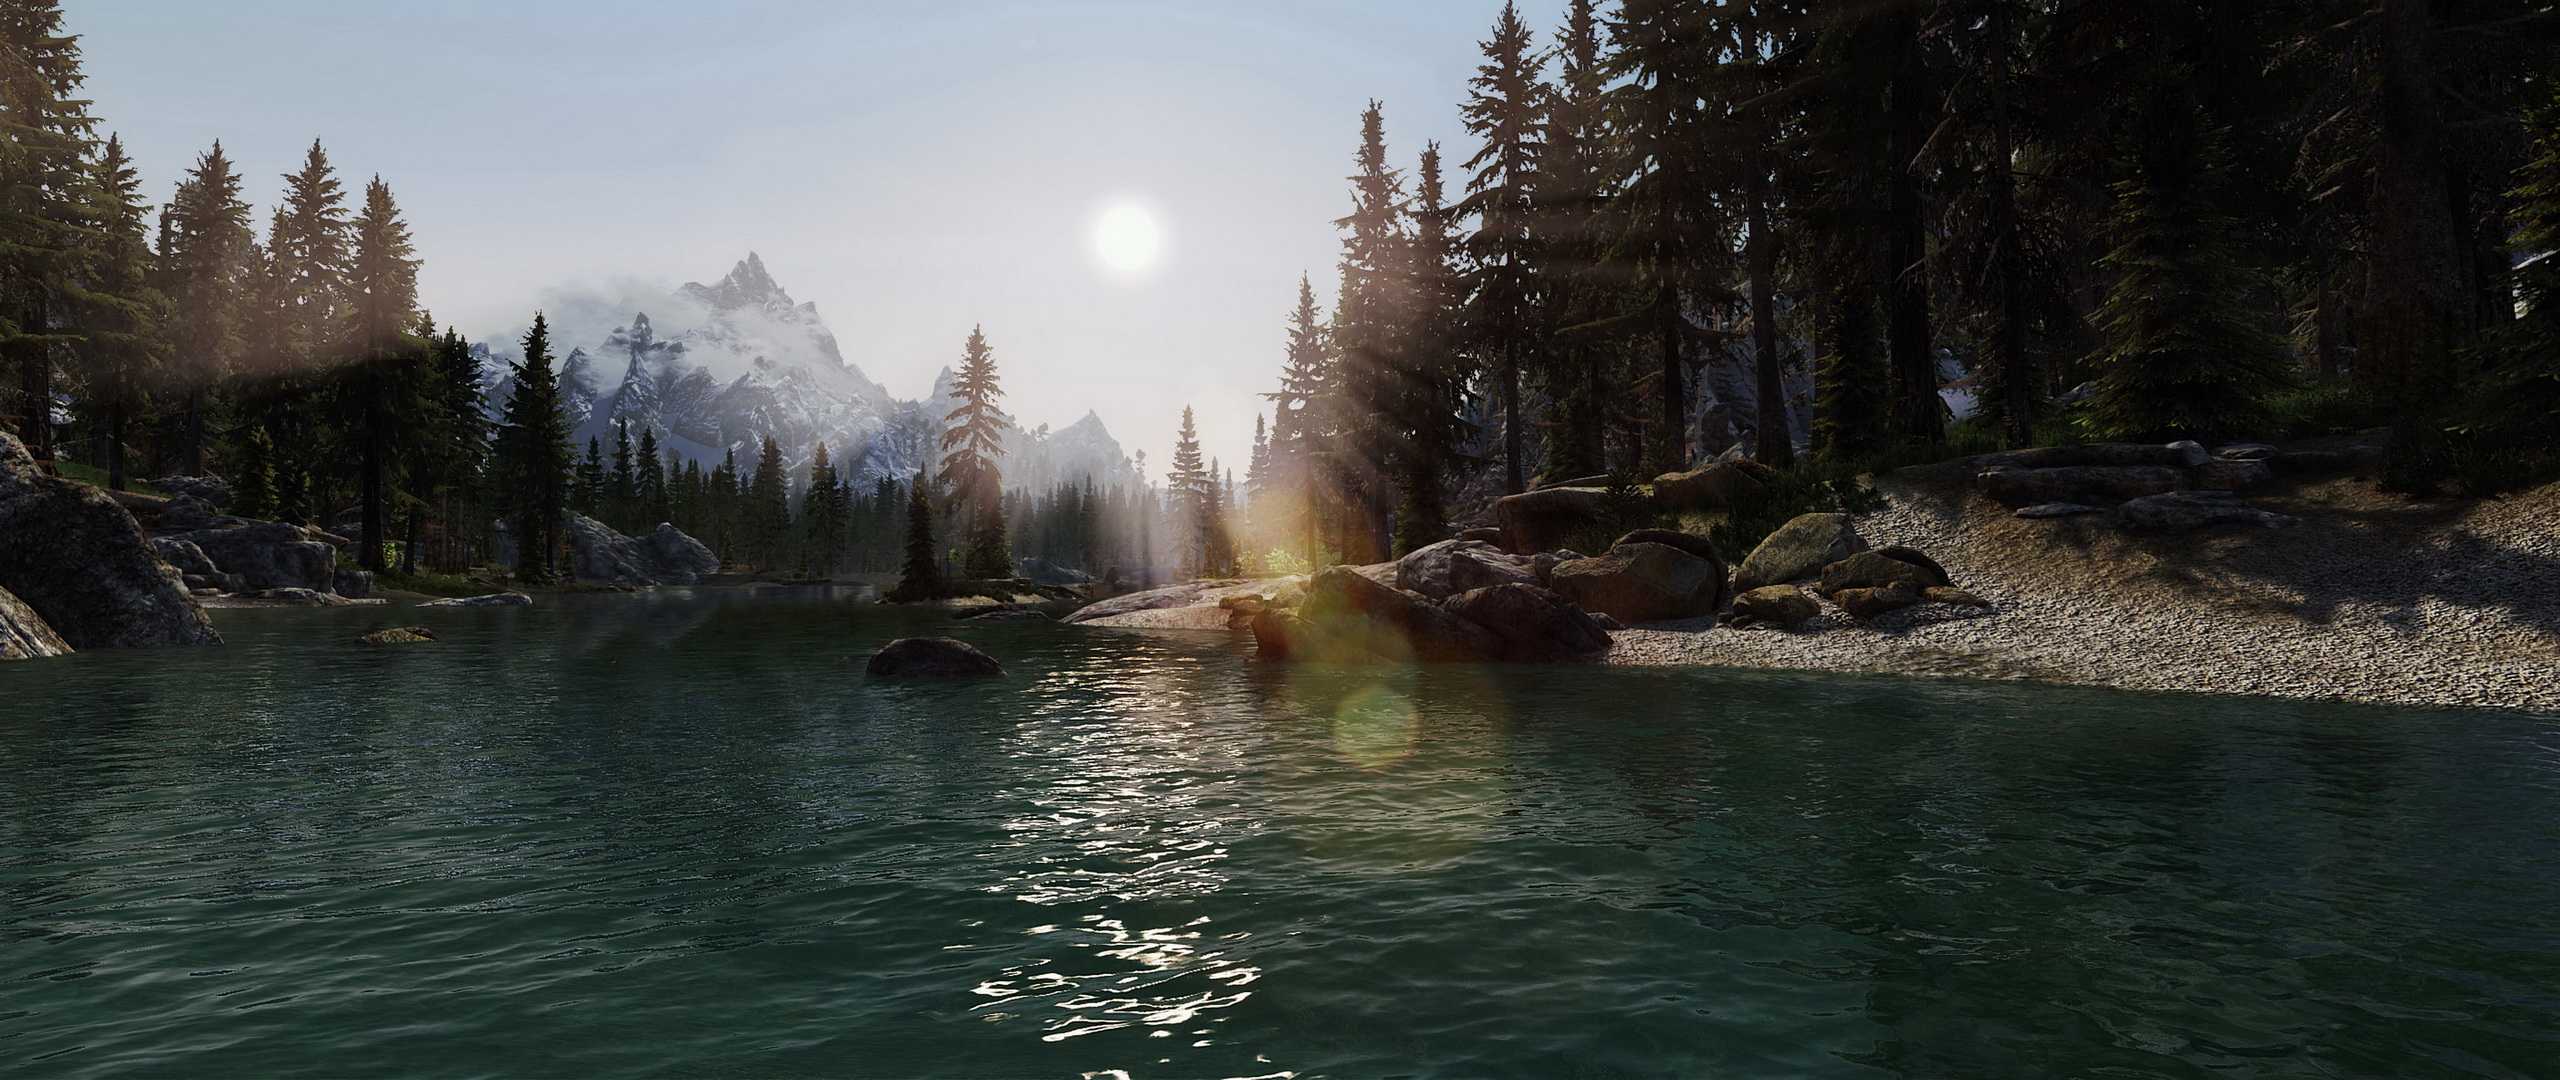 Skyrim Particle Patch for ENB 10.02.2016. 